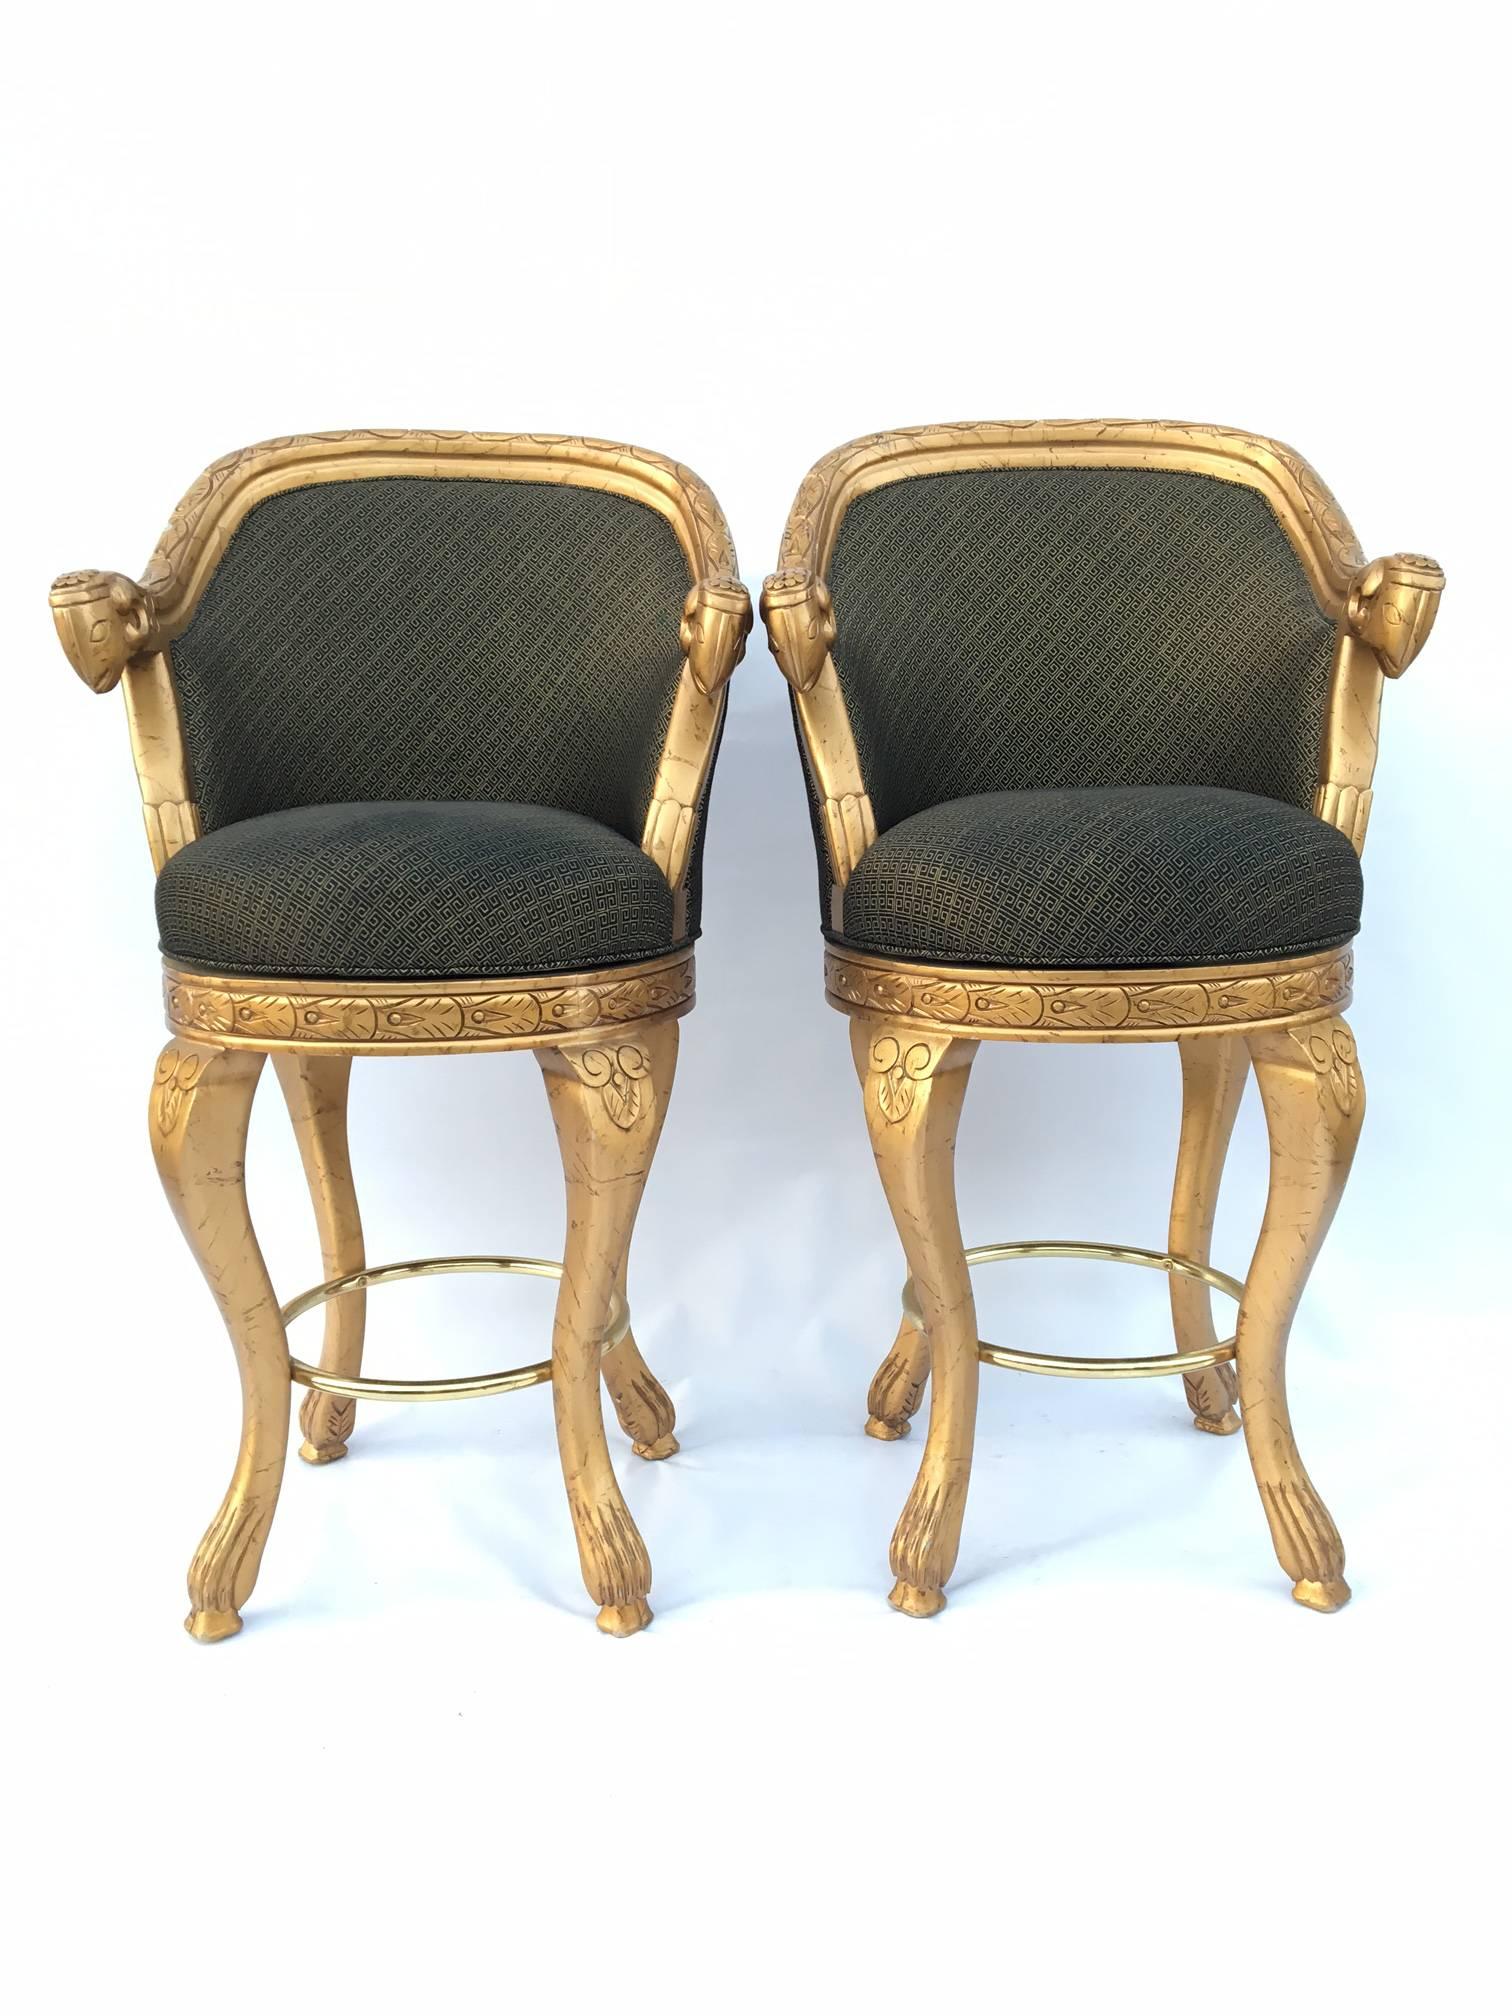 Pair of gold neoclassical Savoy style bar stools featuring a Greek key print upholstery and carved ram's head arms. Swivel seats and brass foot rails. Excellent vintage condition with only very minor signs of use and slight darkening of upholstery.